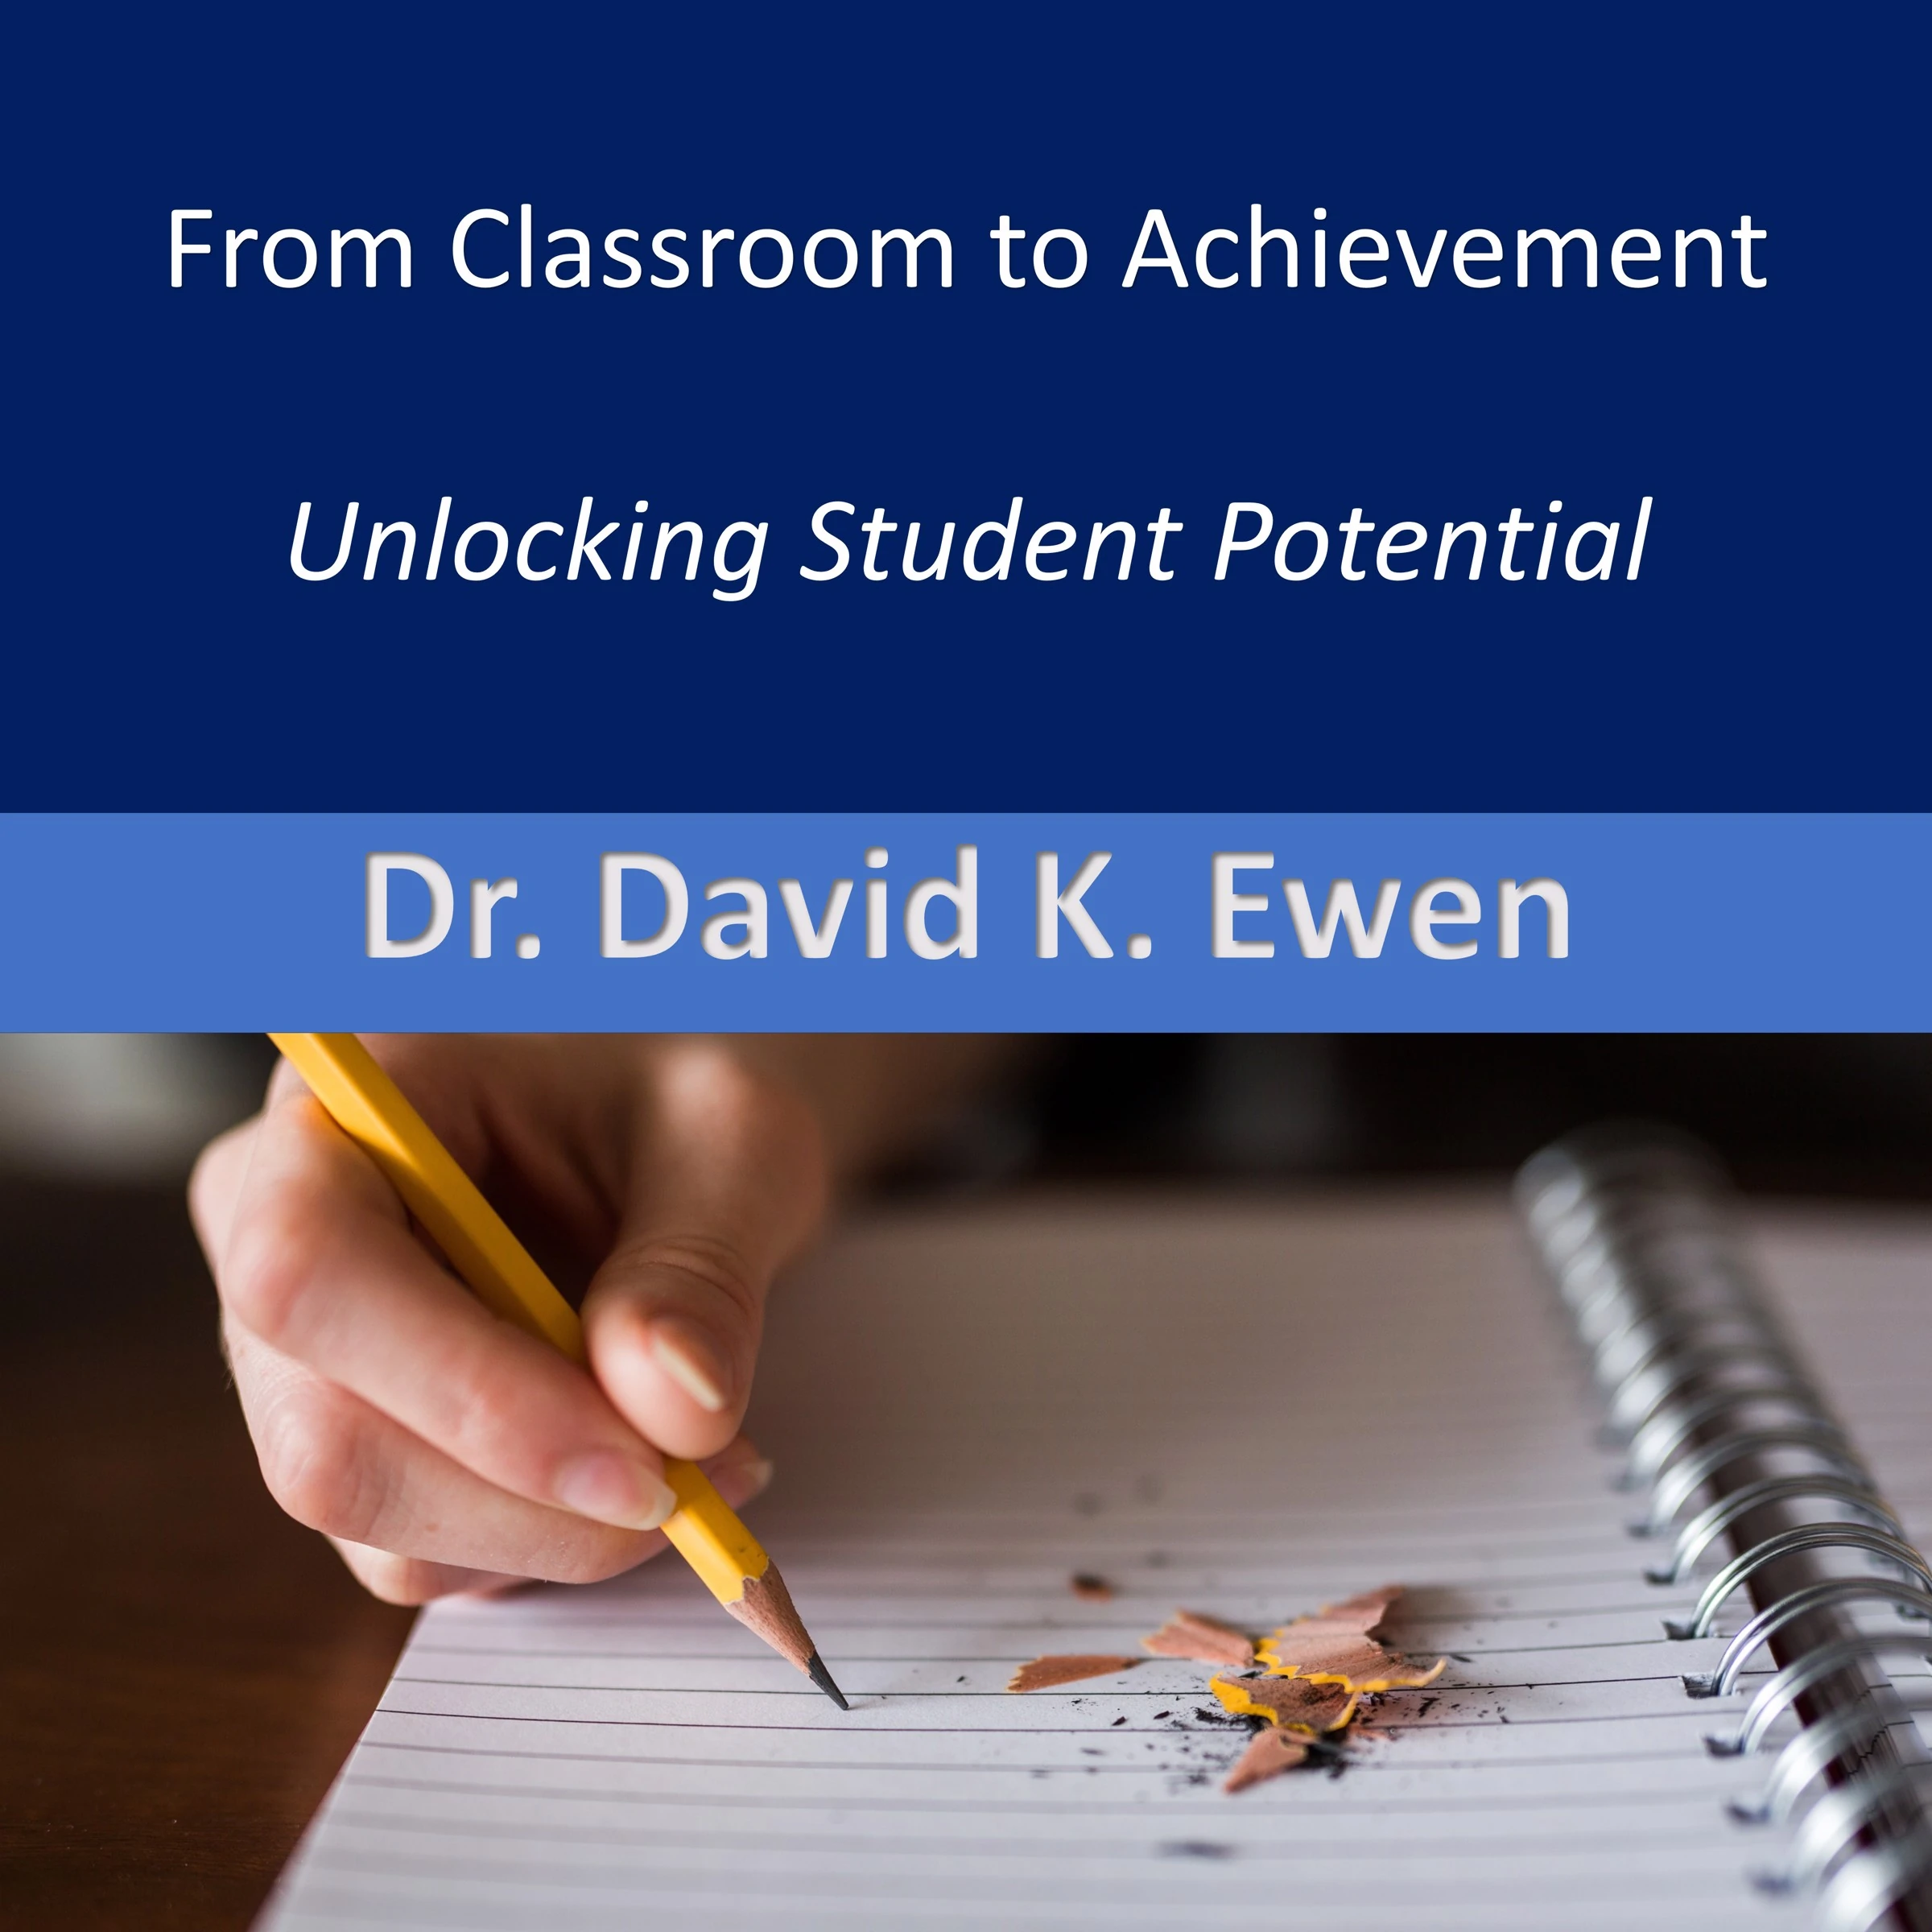 From Classroom to Achievement Audiobook by Dr. David K. Ewen